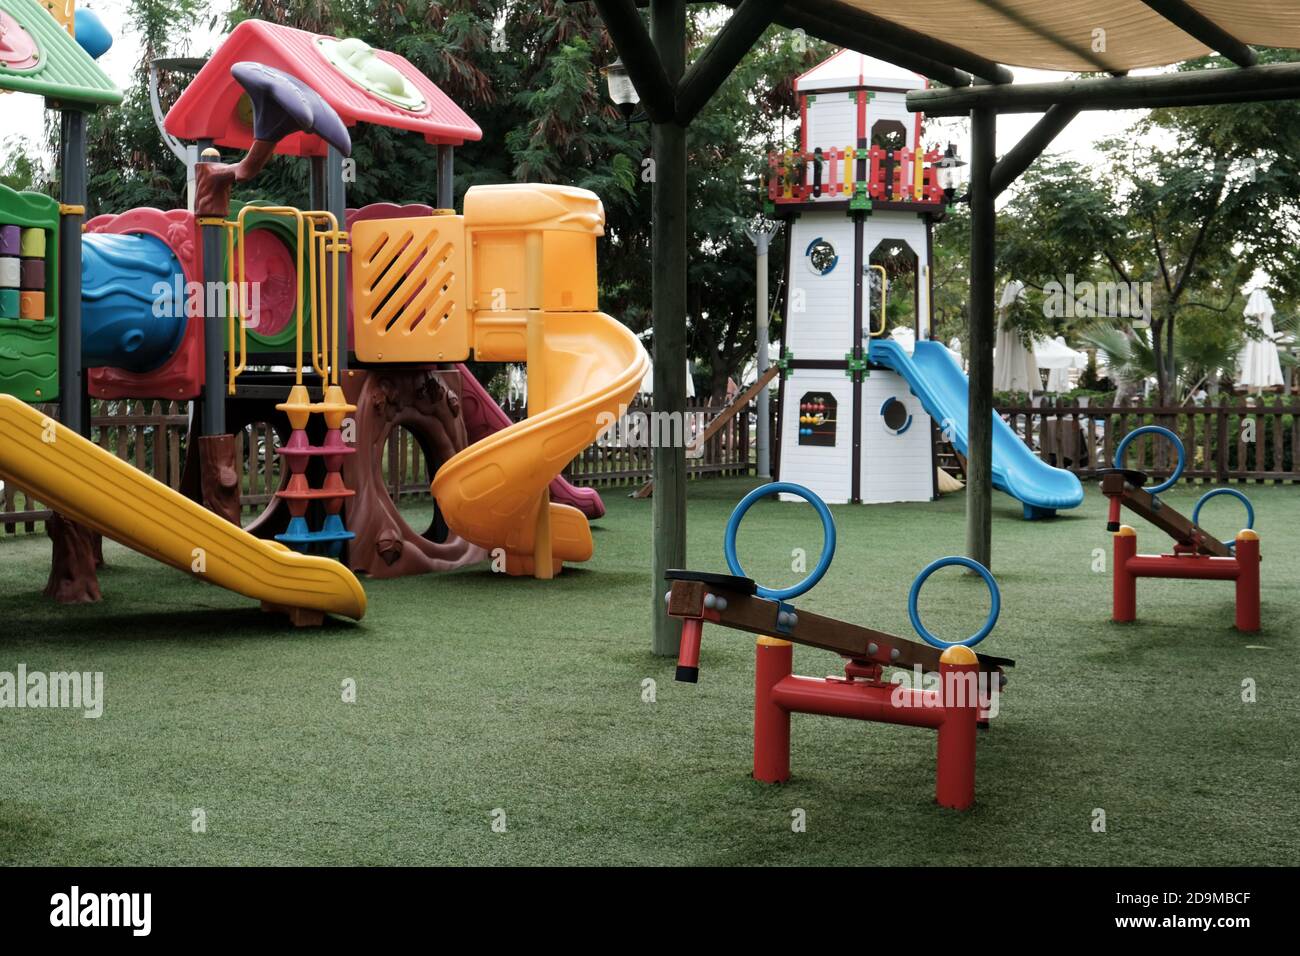 Empty swings in kindergarten. Playground closed for children in pandemic. Unattended slide and swing set during coronavirus outbreak. Nobody playing Stock Photo